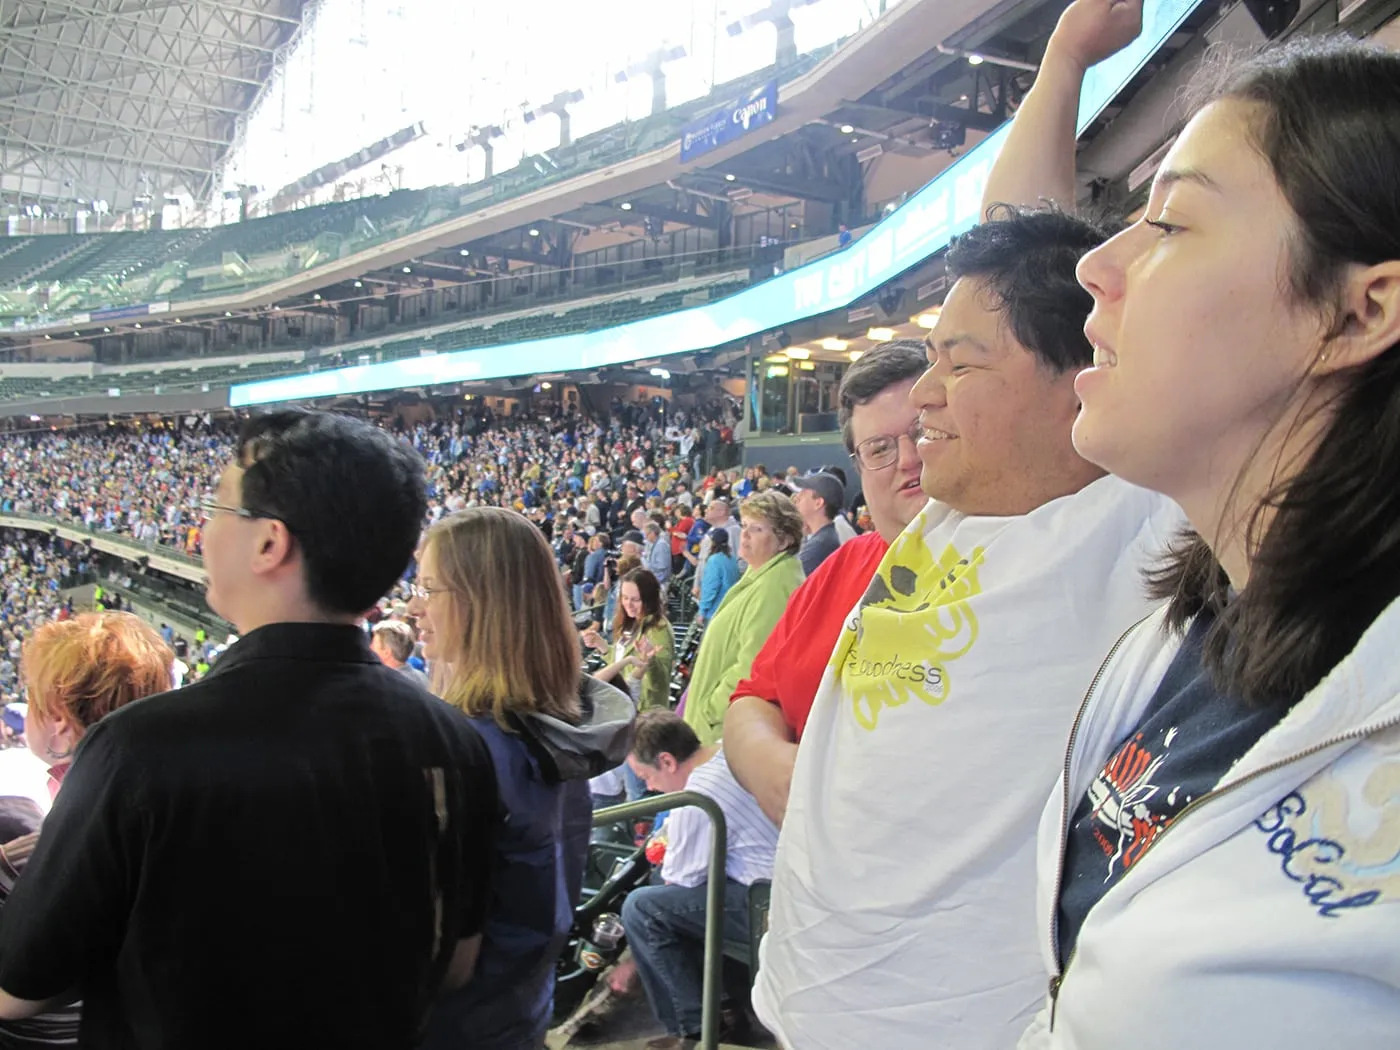 Seventh inning stretch at a Brewers game at Millers Park in Milwaukee.